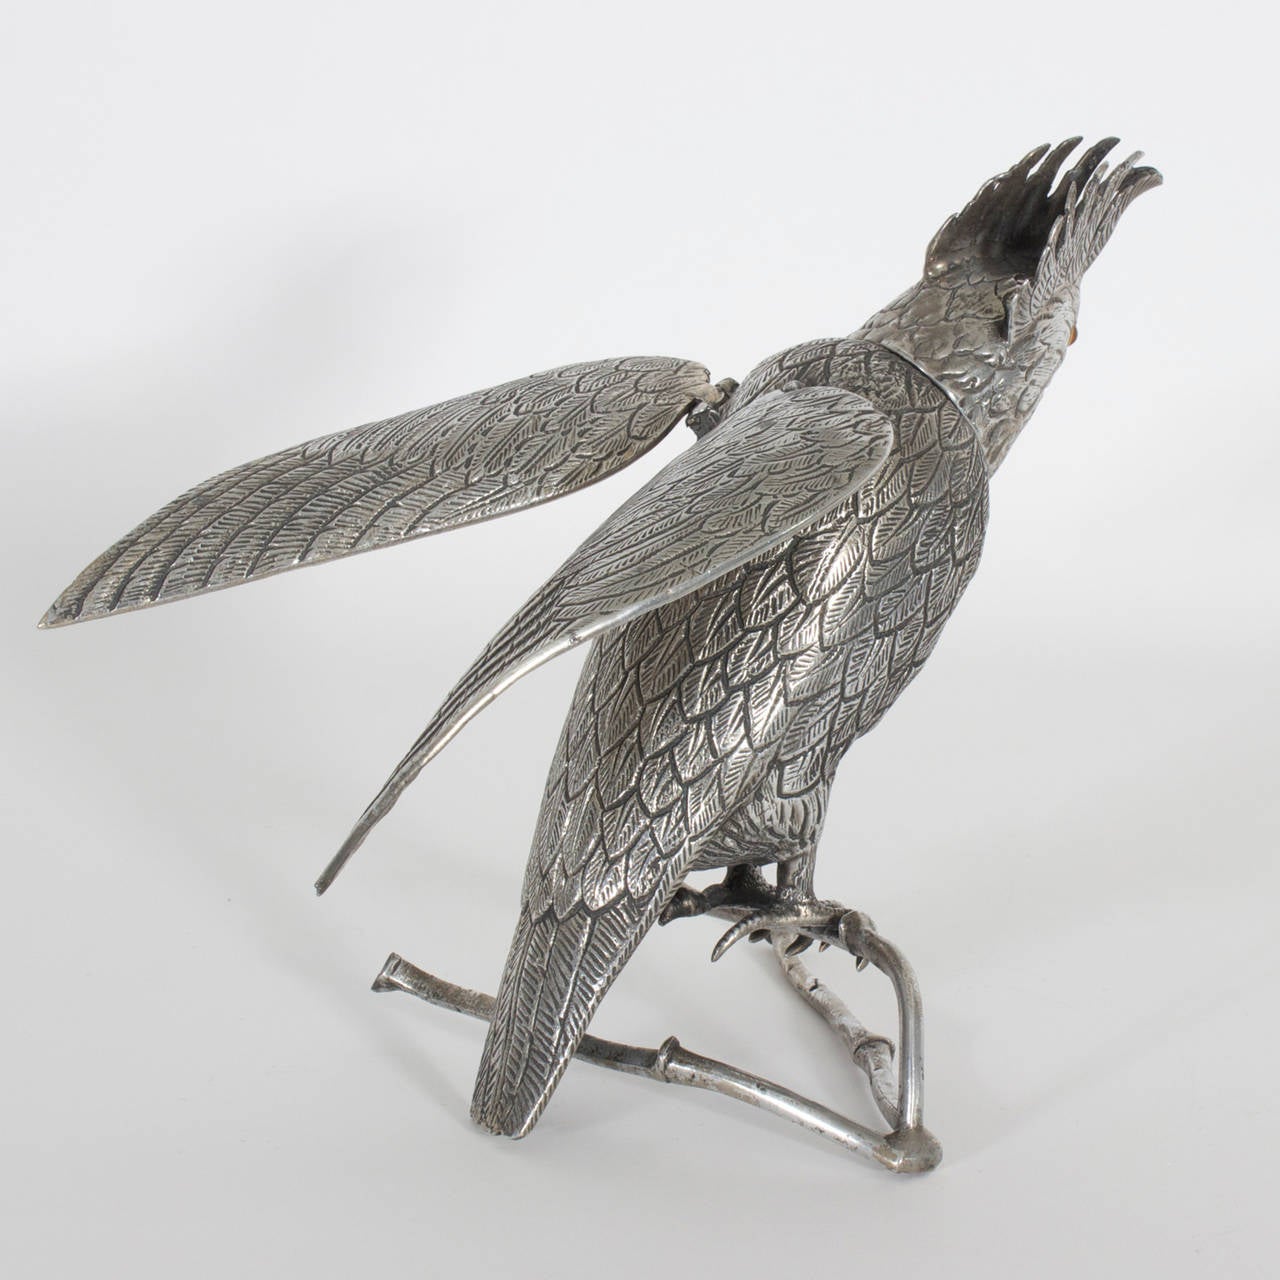 Rustic Silvered Metal Parrot with Hinged Wings on Branch Container or Box